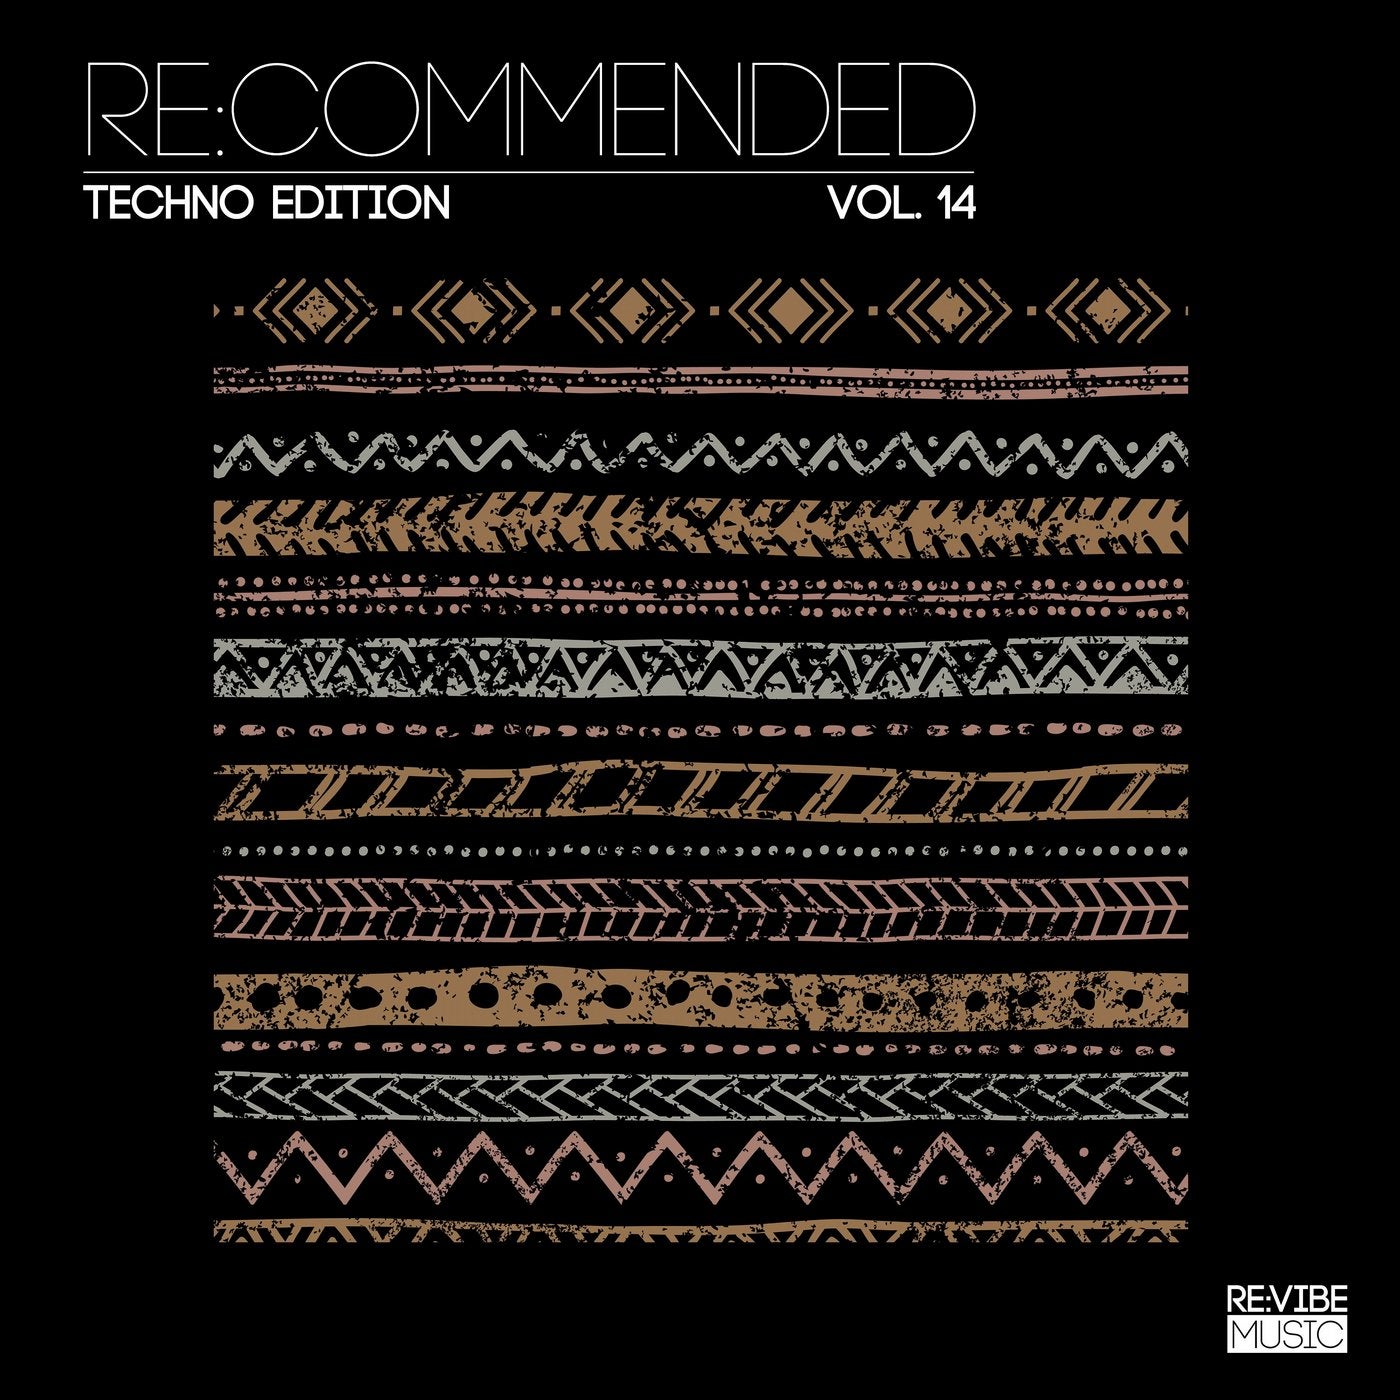 Re:Commended - Techno Edition, Vol. 14